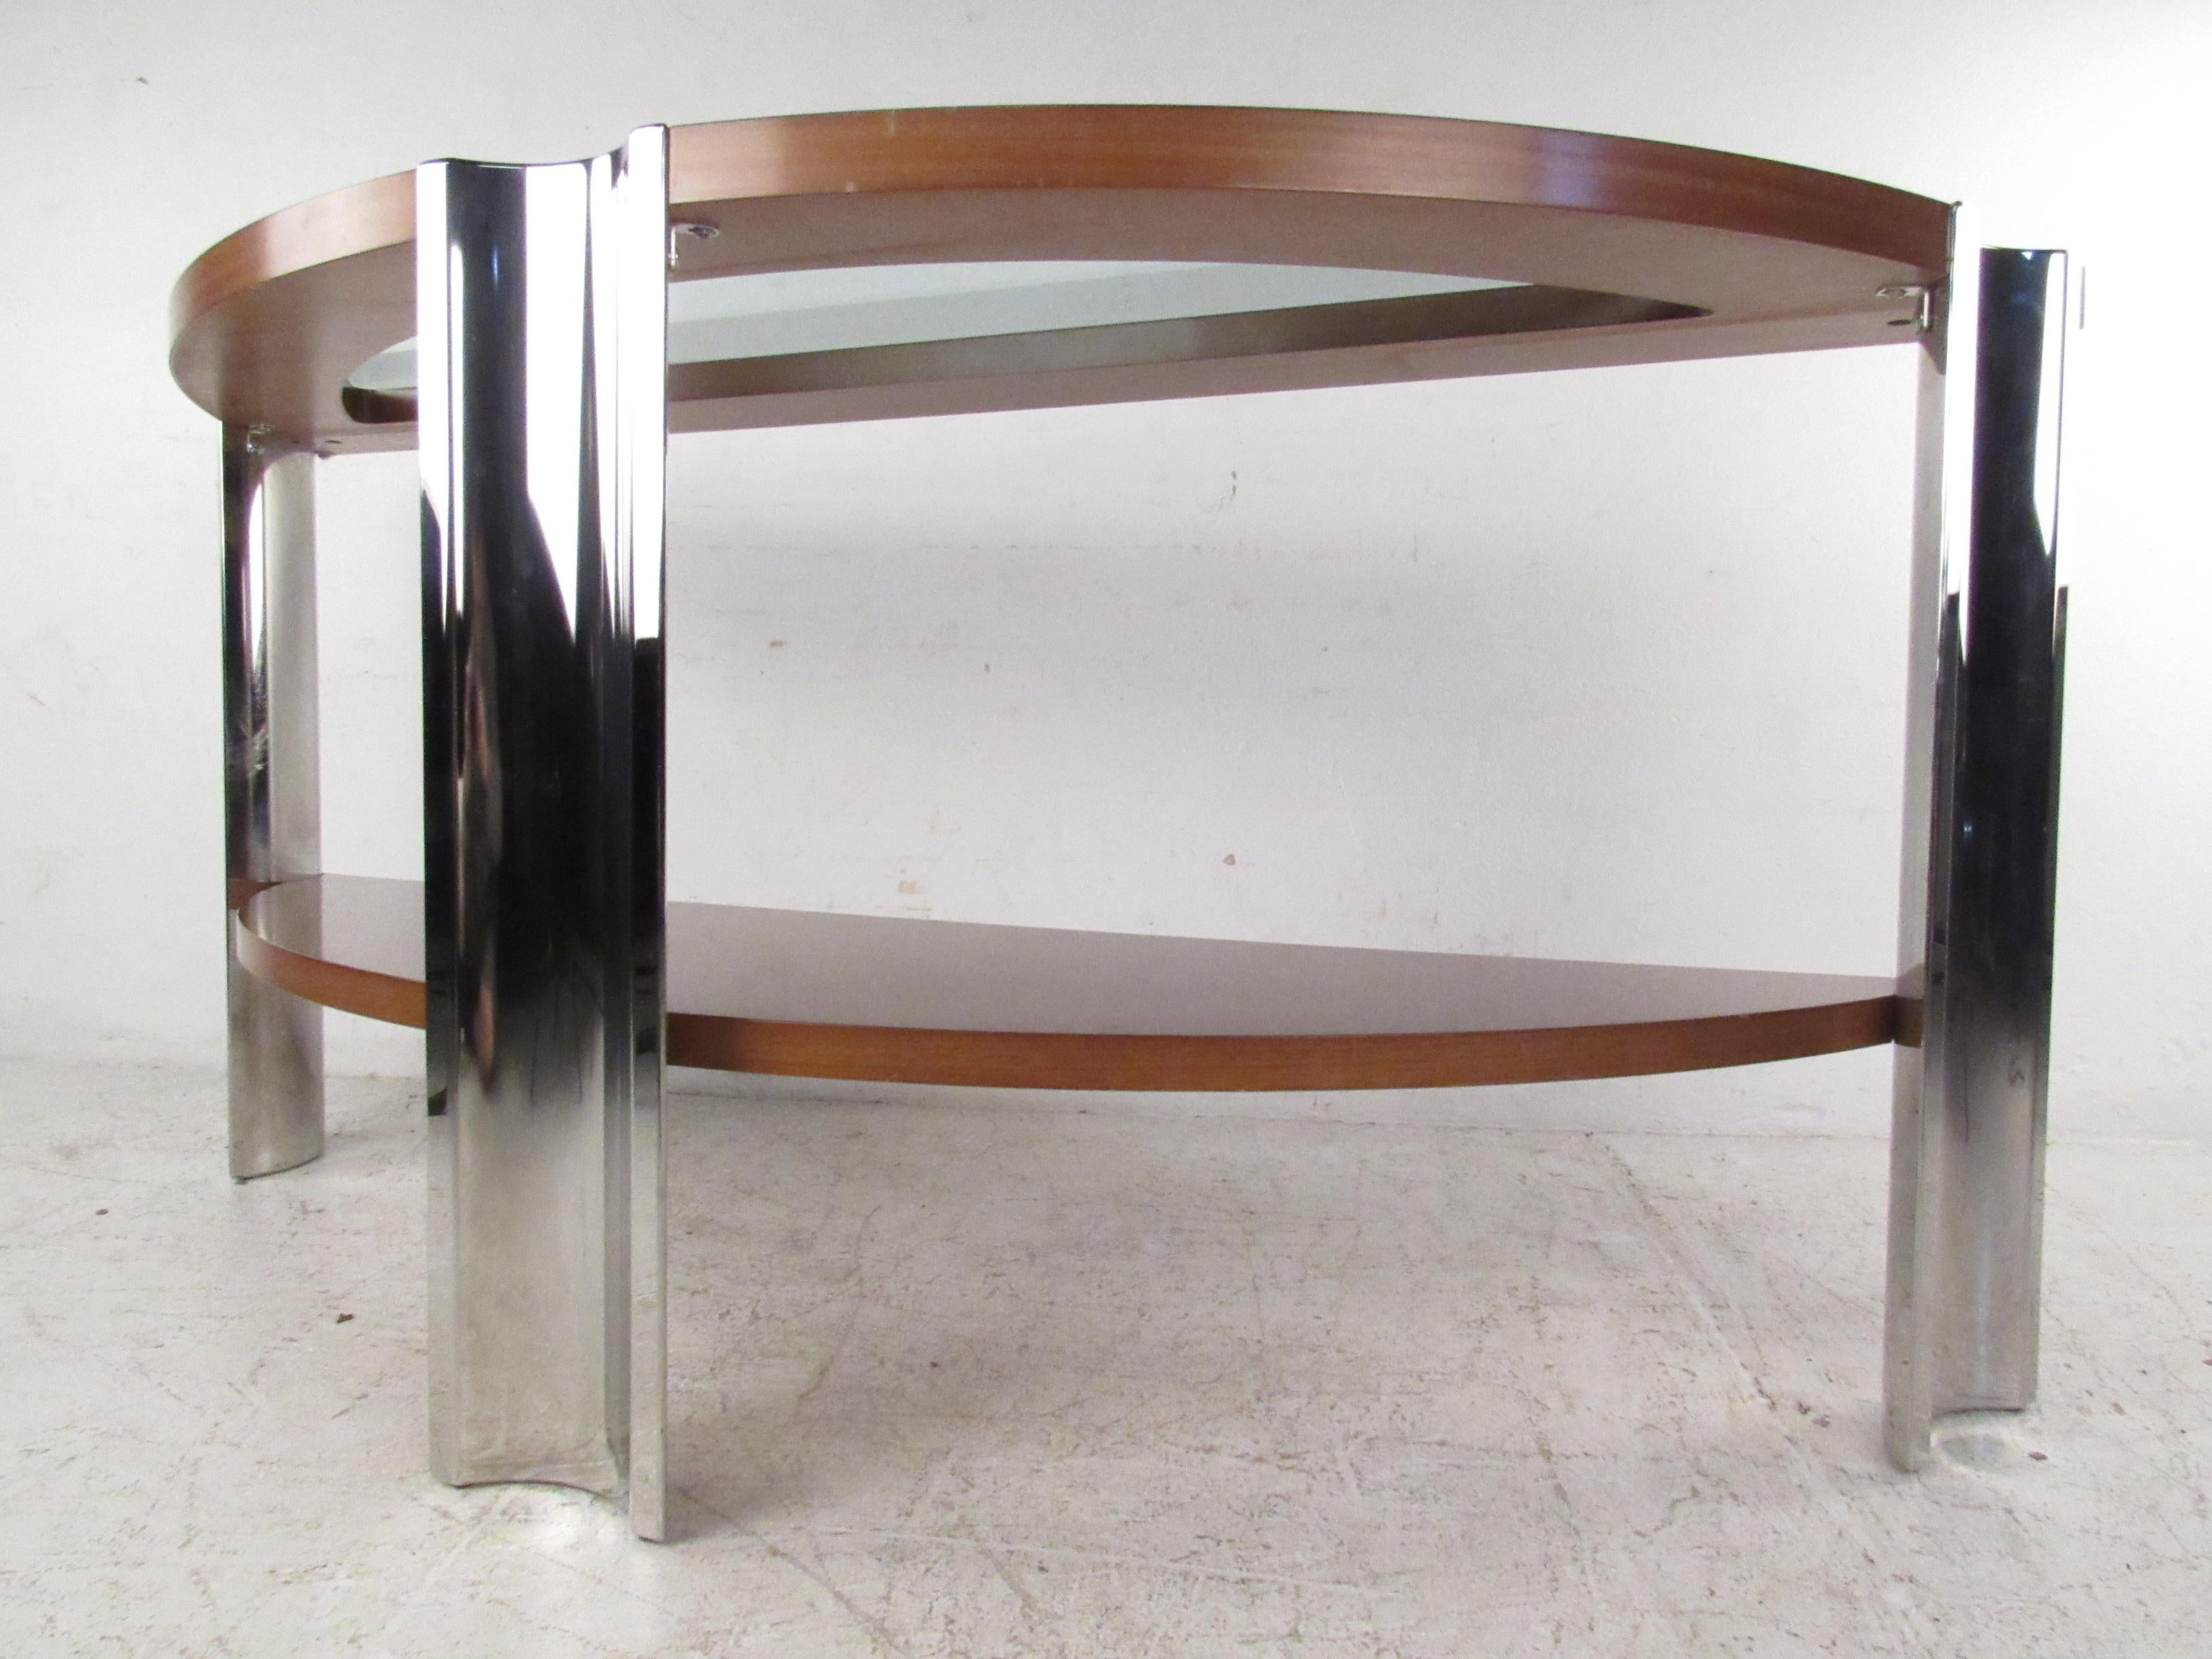 This elegant Mid-Century Modern console table features a tripod frame that's shaped like a half moon. An unusual Italian design made exclusively for Excelsior. A sturdy piece with chrome legs, gorgeous wood grain, and a beveled glass insert on the